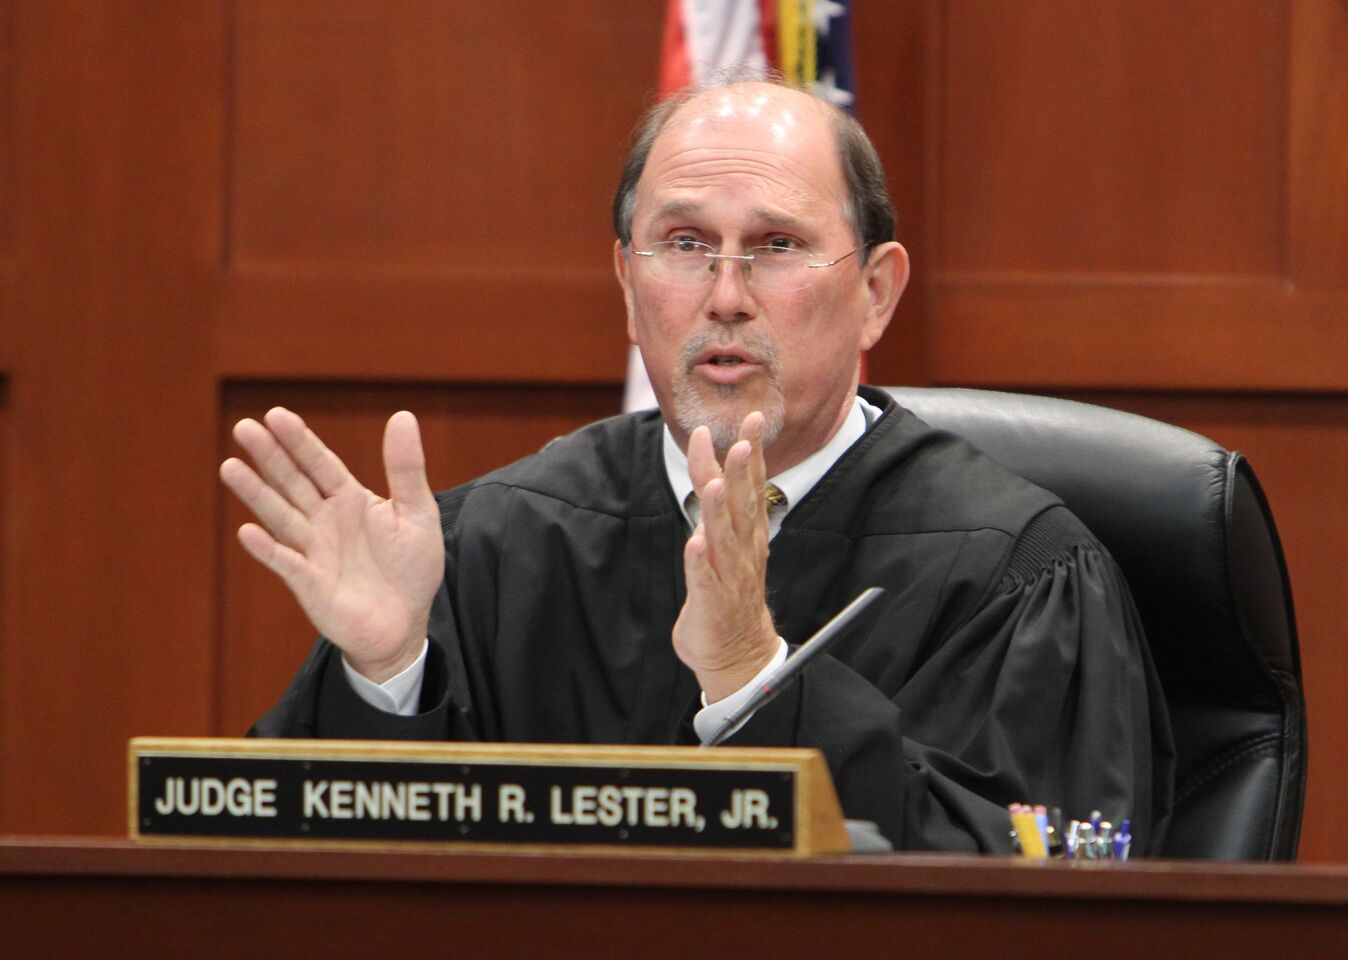 Biased? Judge shoots down defense motion, stays on case